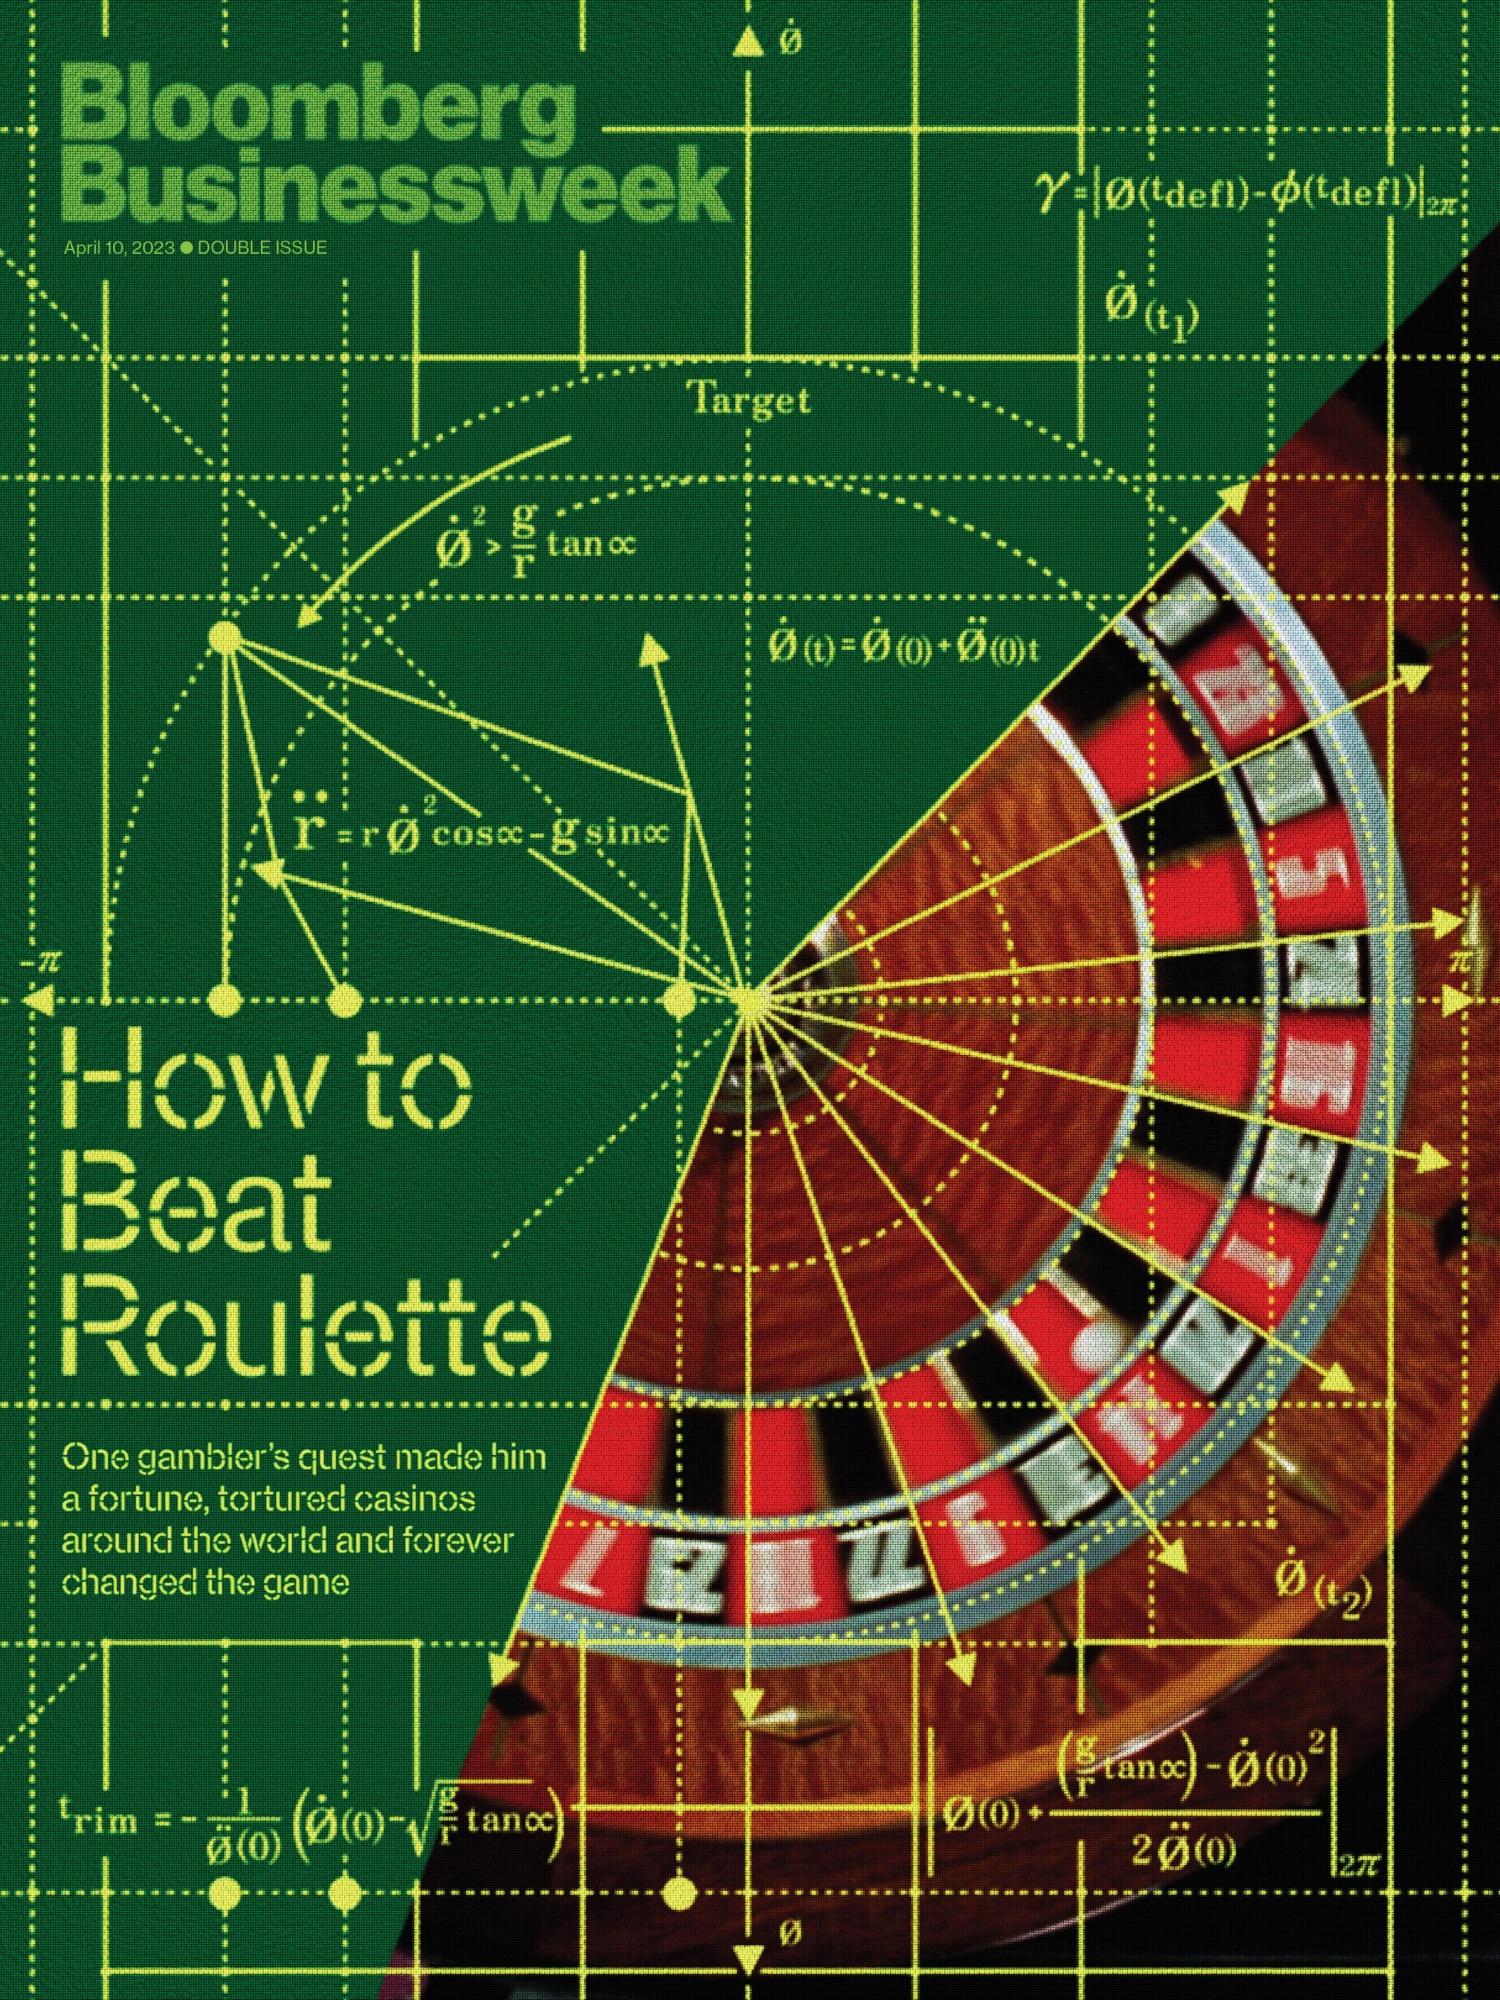 Apparently This Matters: Wikipedia random roulette